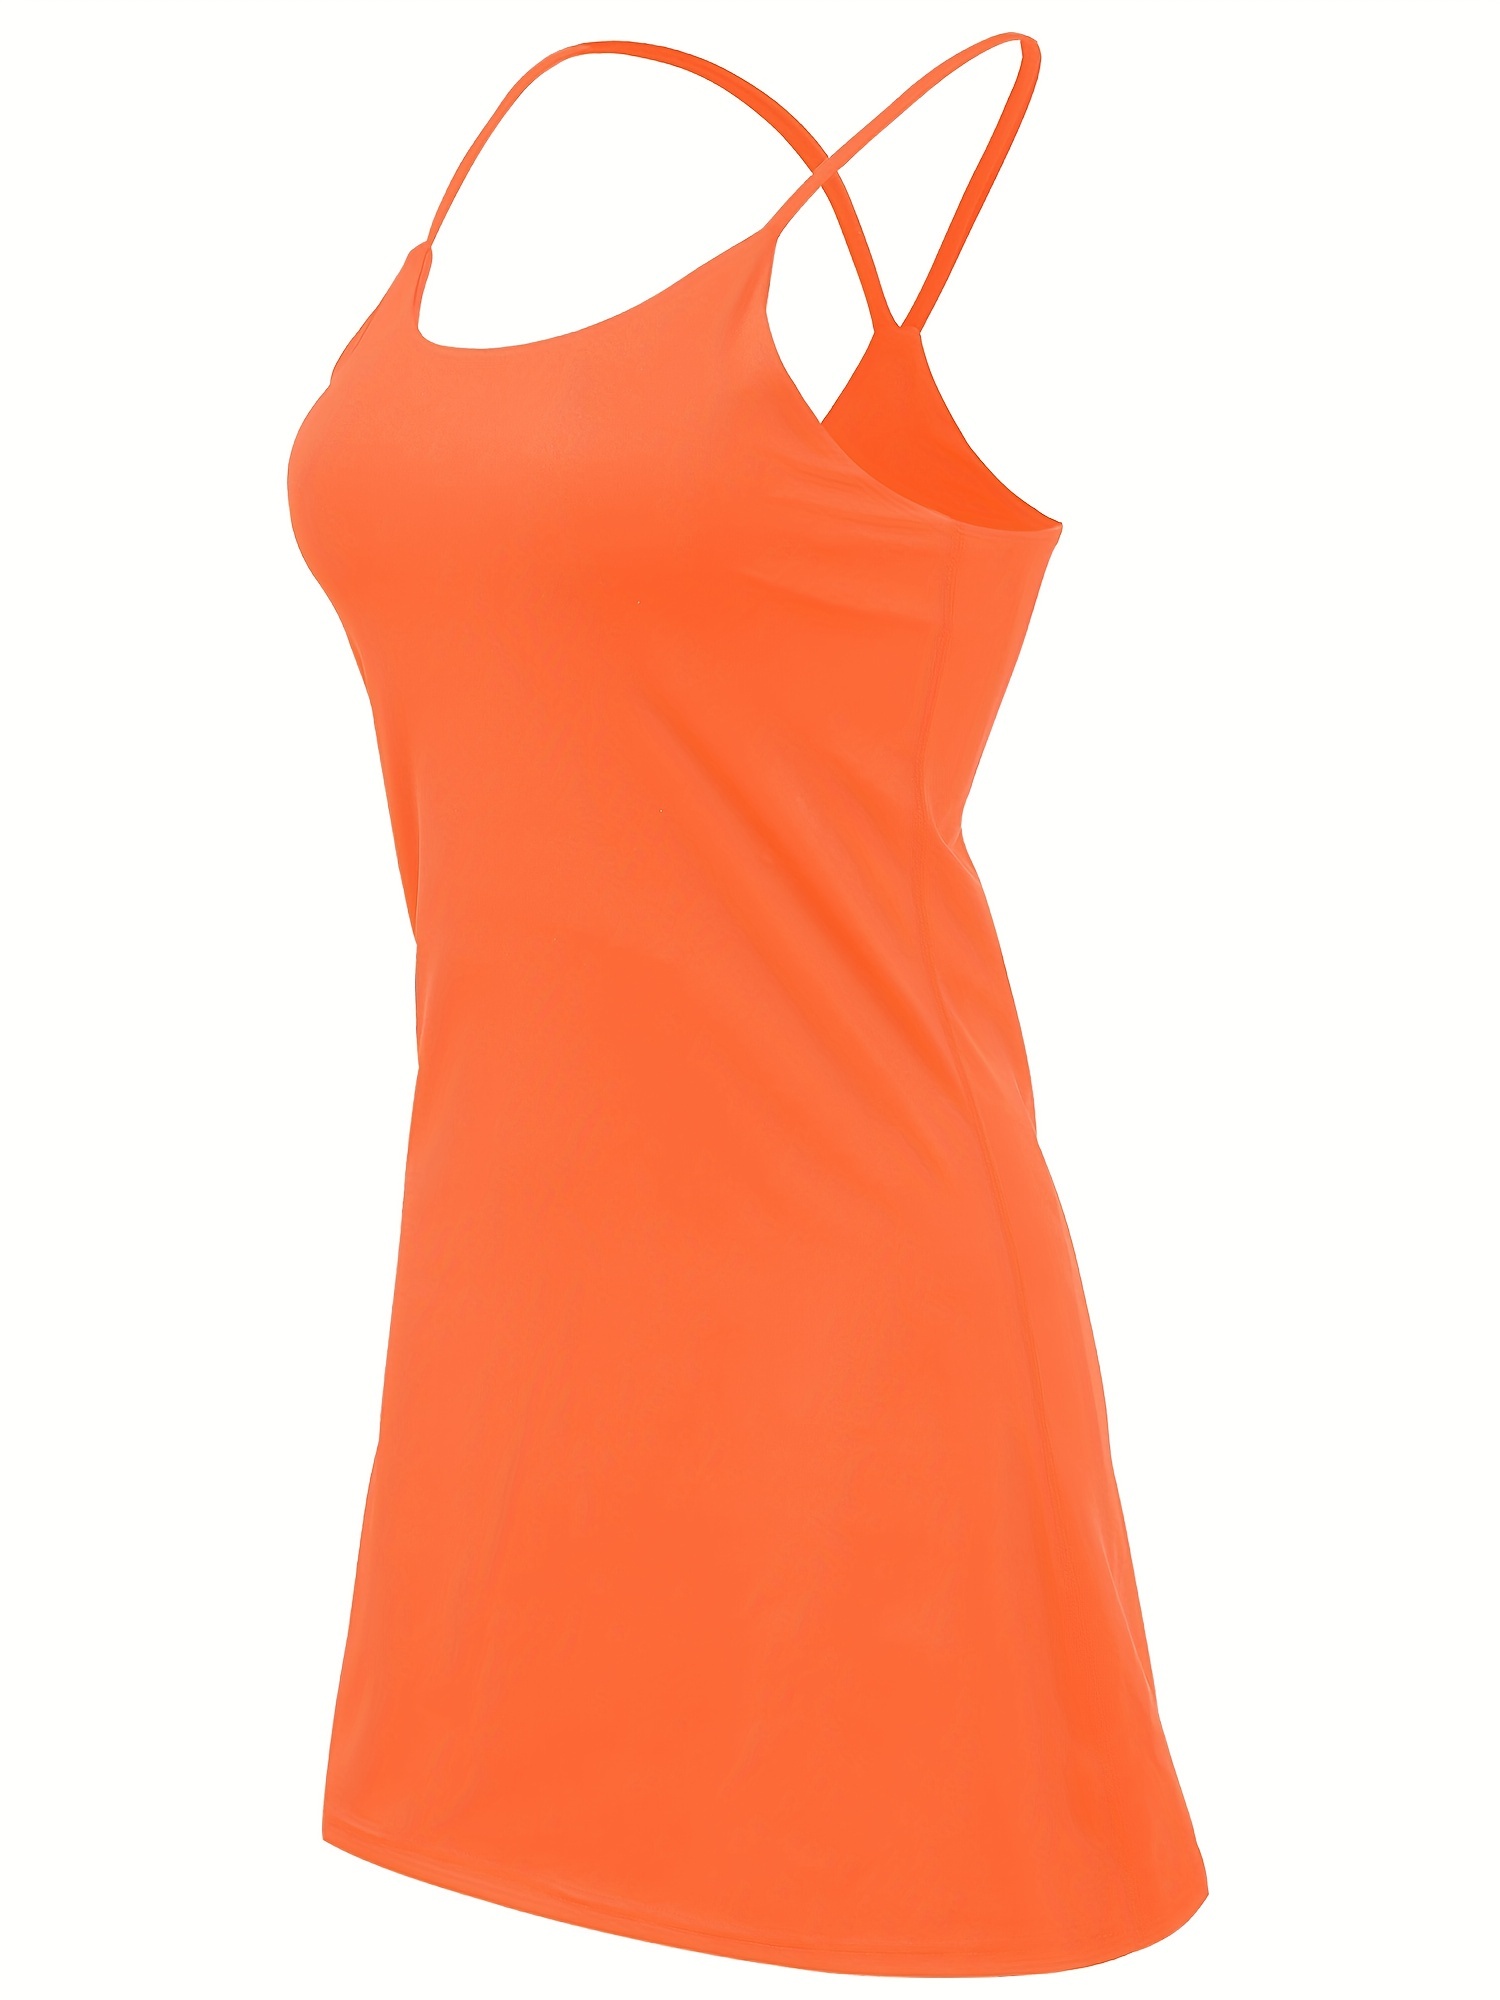 Tennis Dress for Women, Tennis Golf Dresses with Built in Shorts and  Pockets for Sleeveless Workout Athletic Dresses